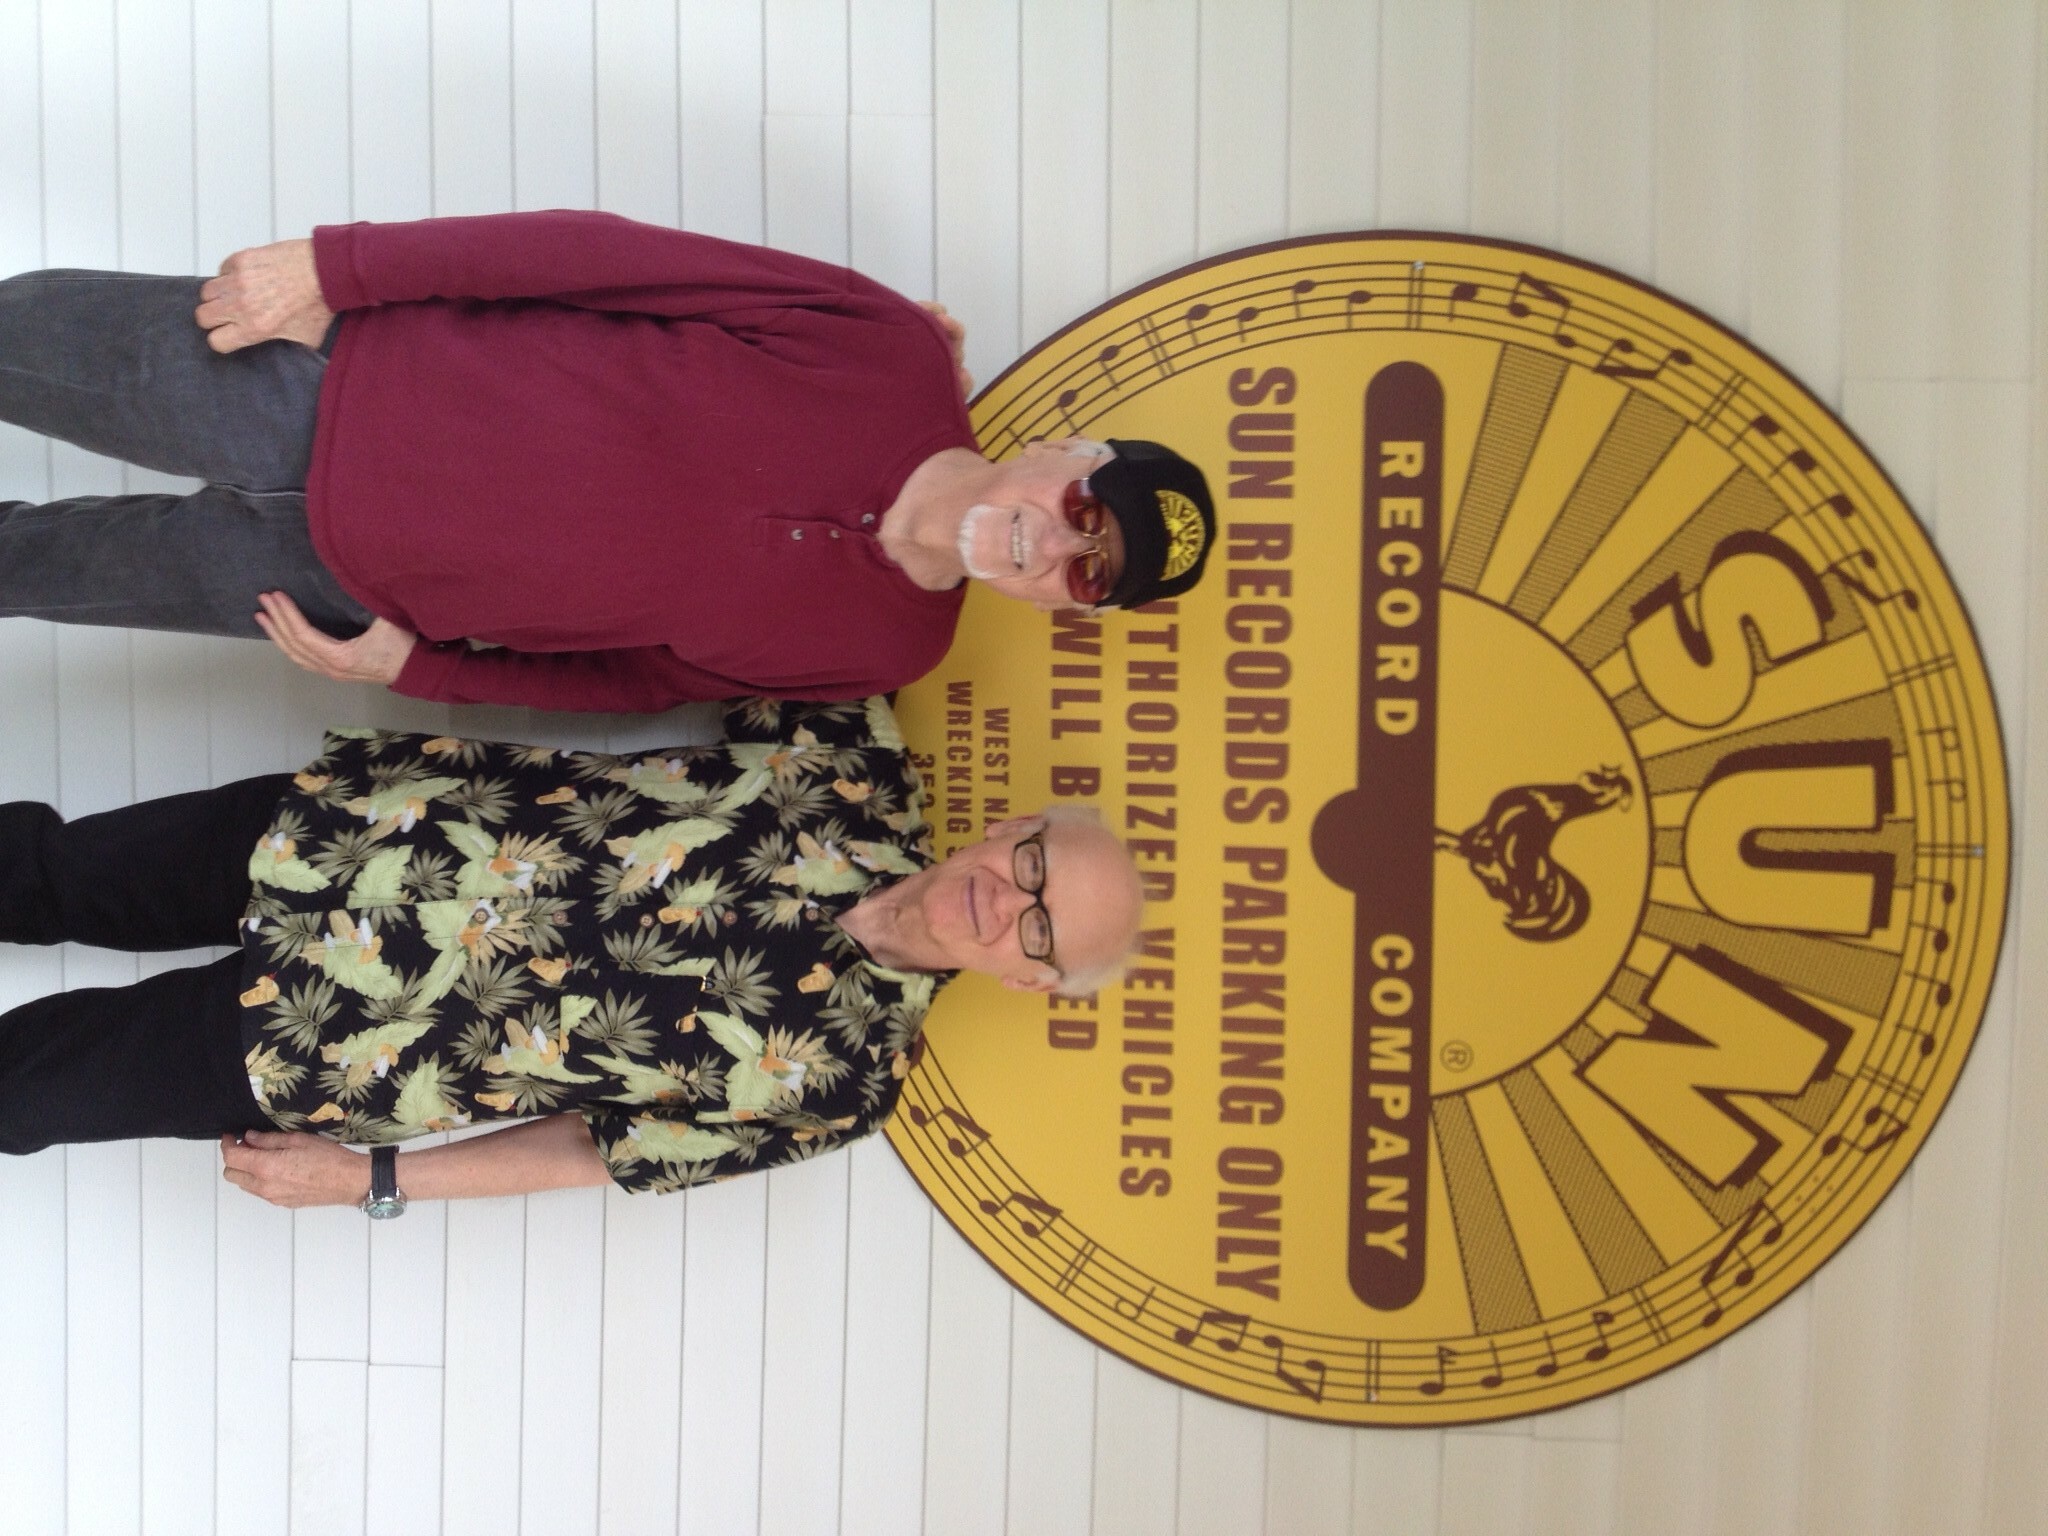 We were happy to welcome Sonny Burgess (left) as he visited the Sun HQ.